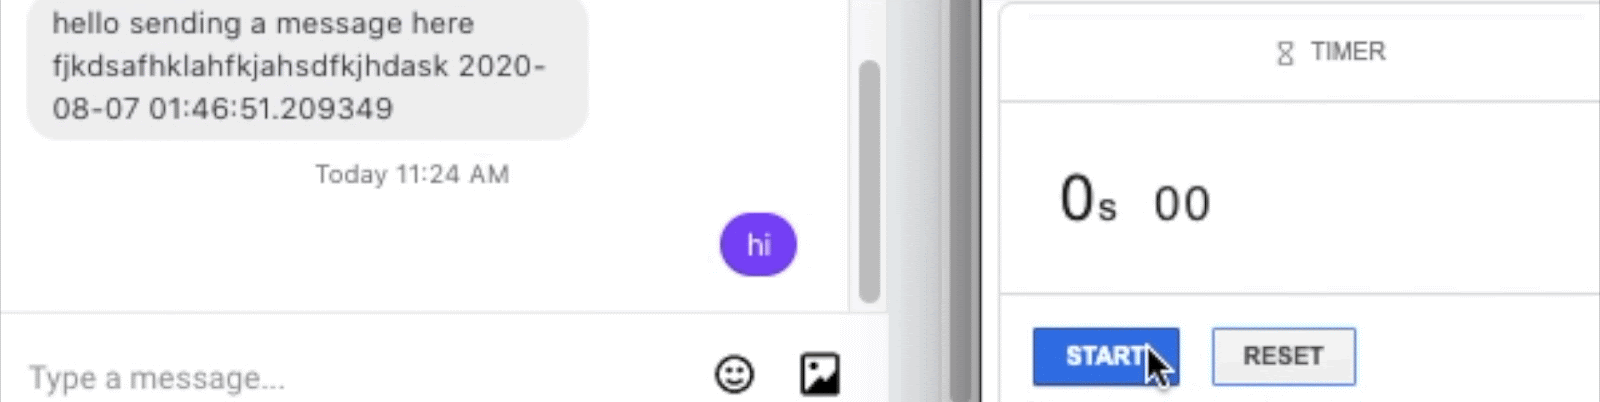 gif of SMS text message demo alongside a timer